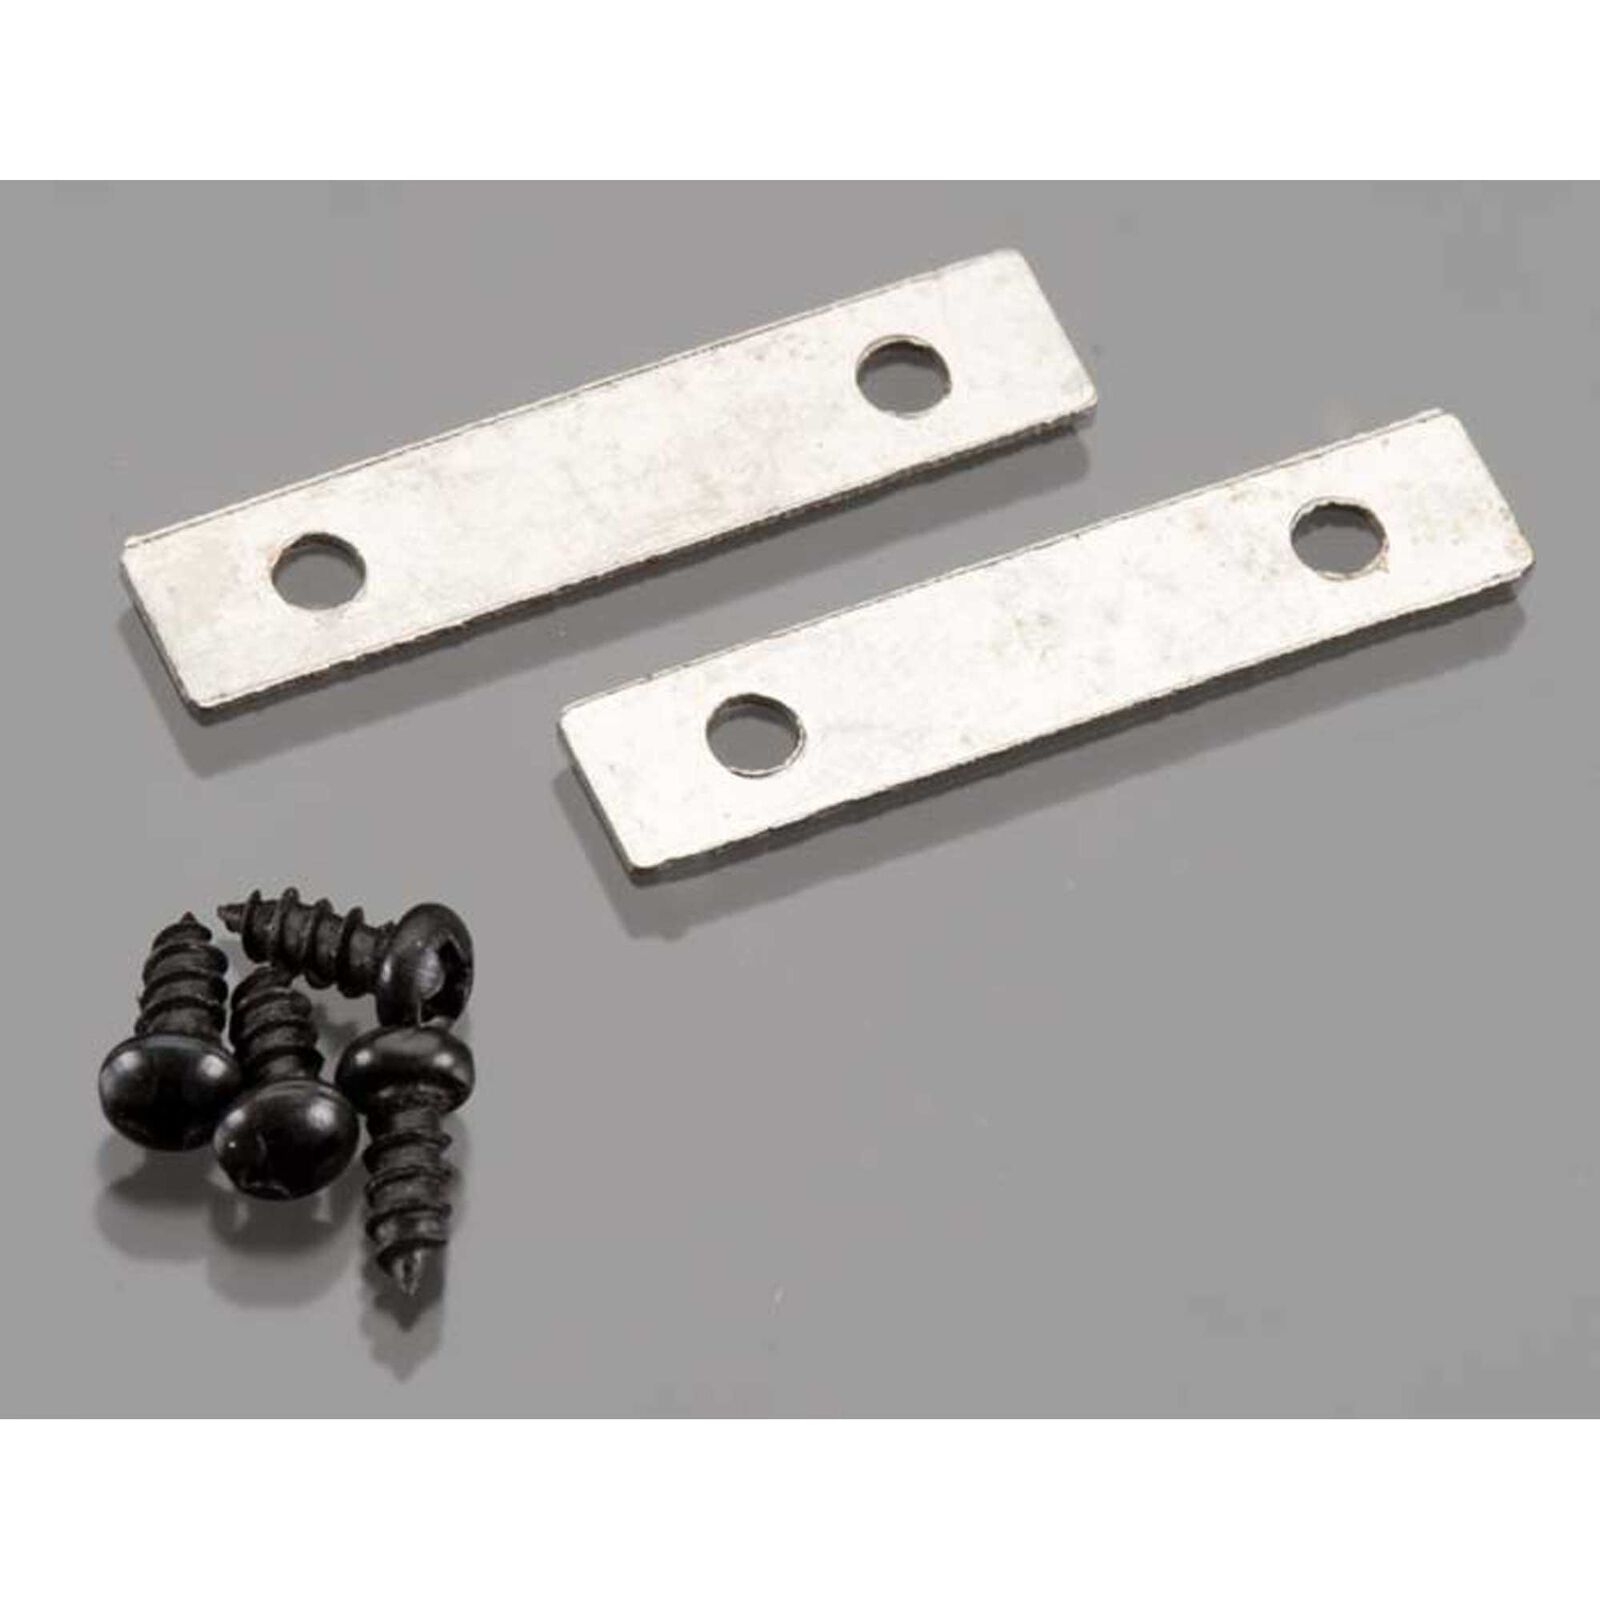 Reed Valve Plates: DLE-60 (2)